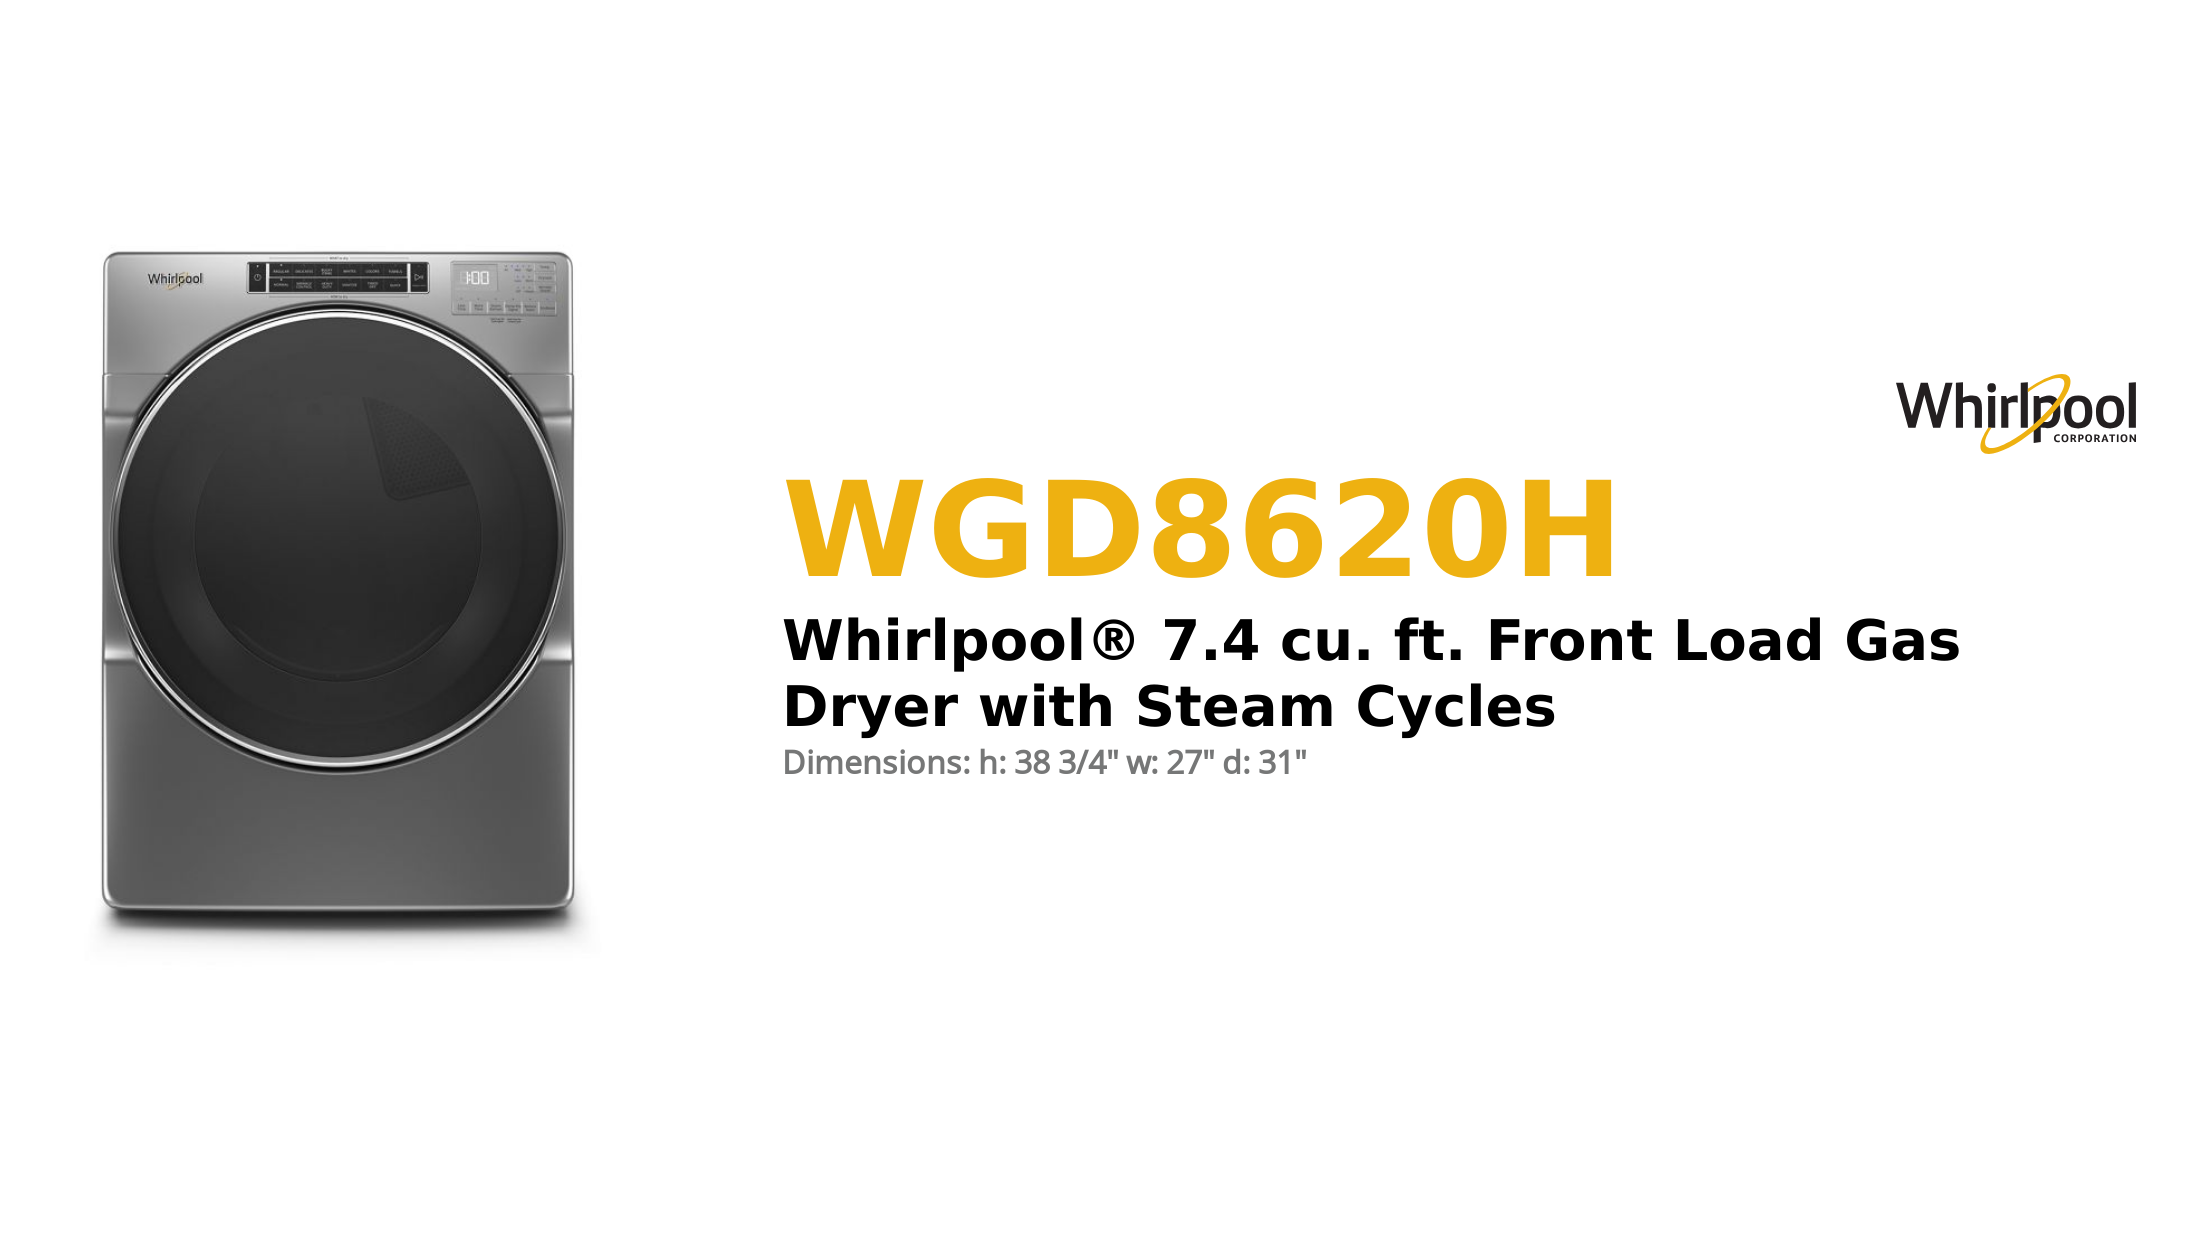 Whirlpool® 7.4 cu. ft. Front Load Gas Dryer with Steam Cycles